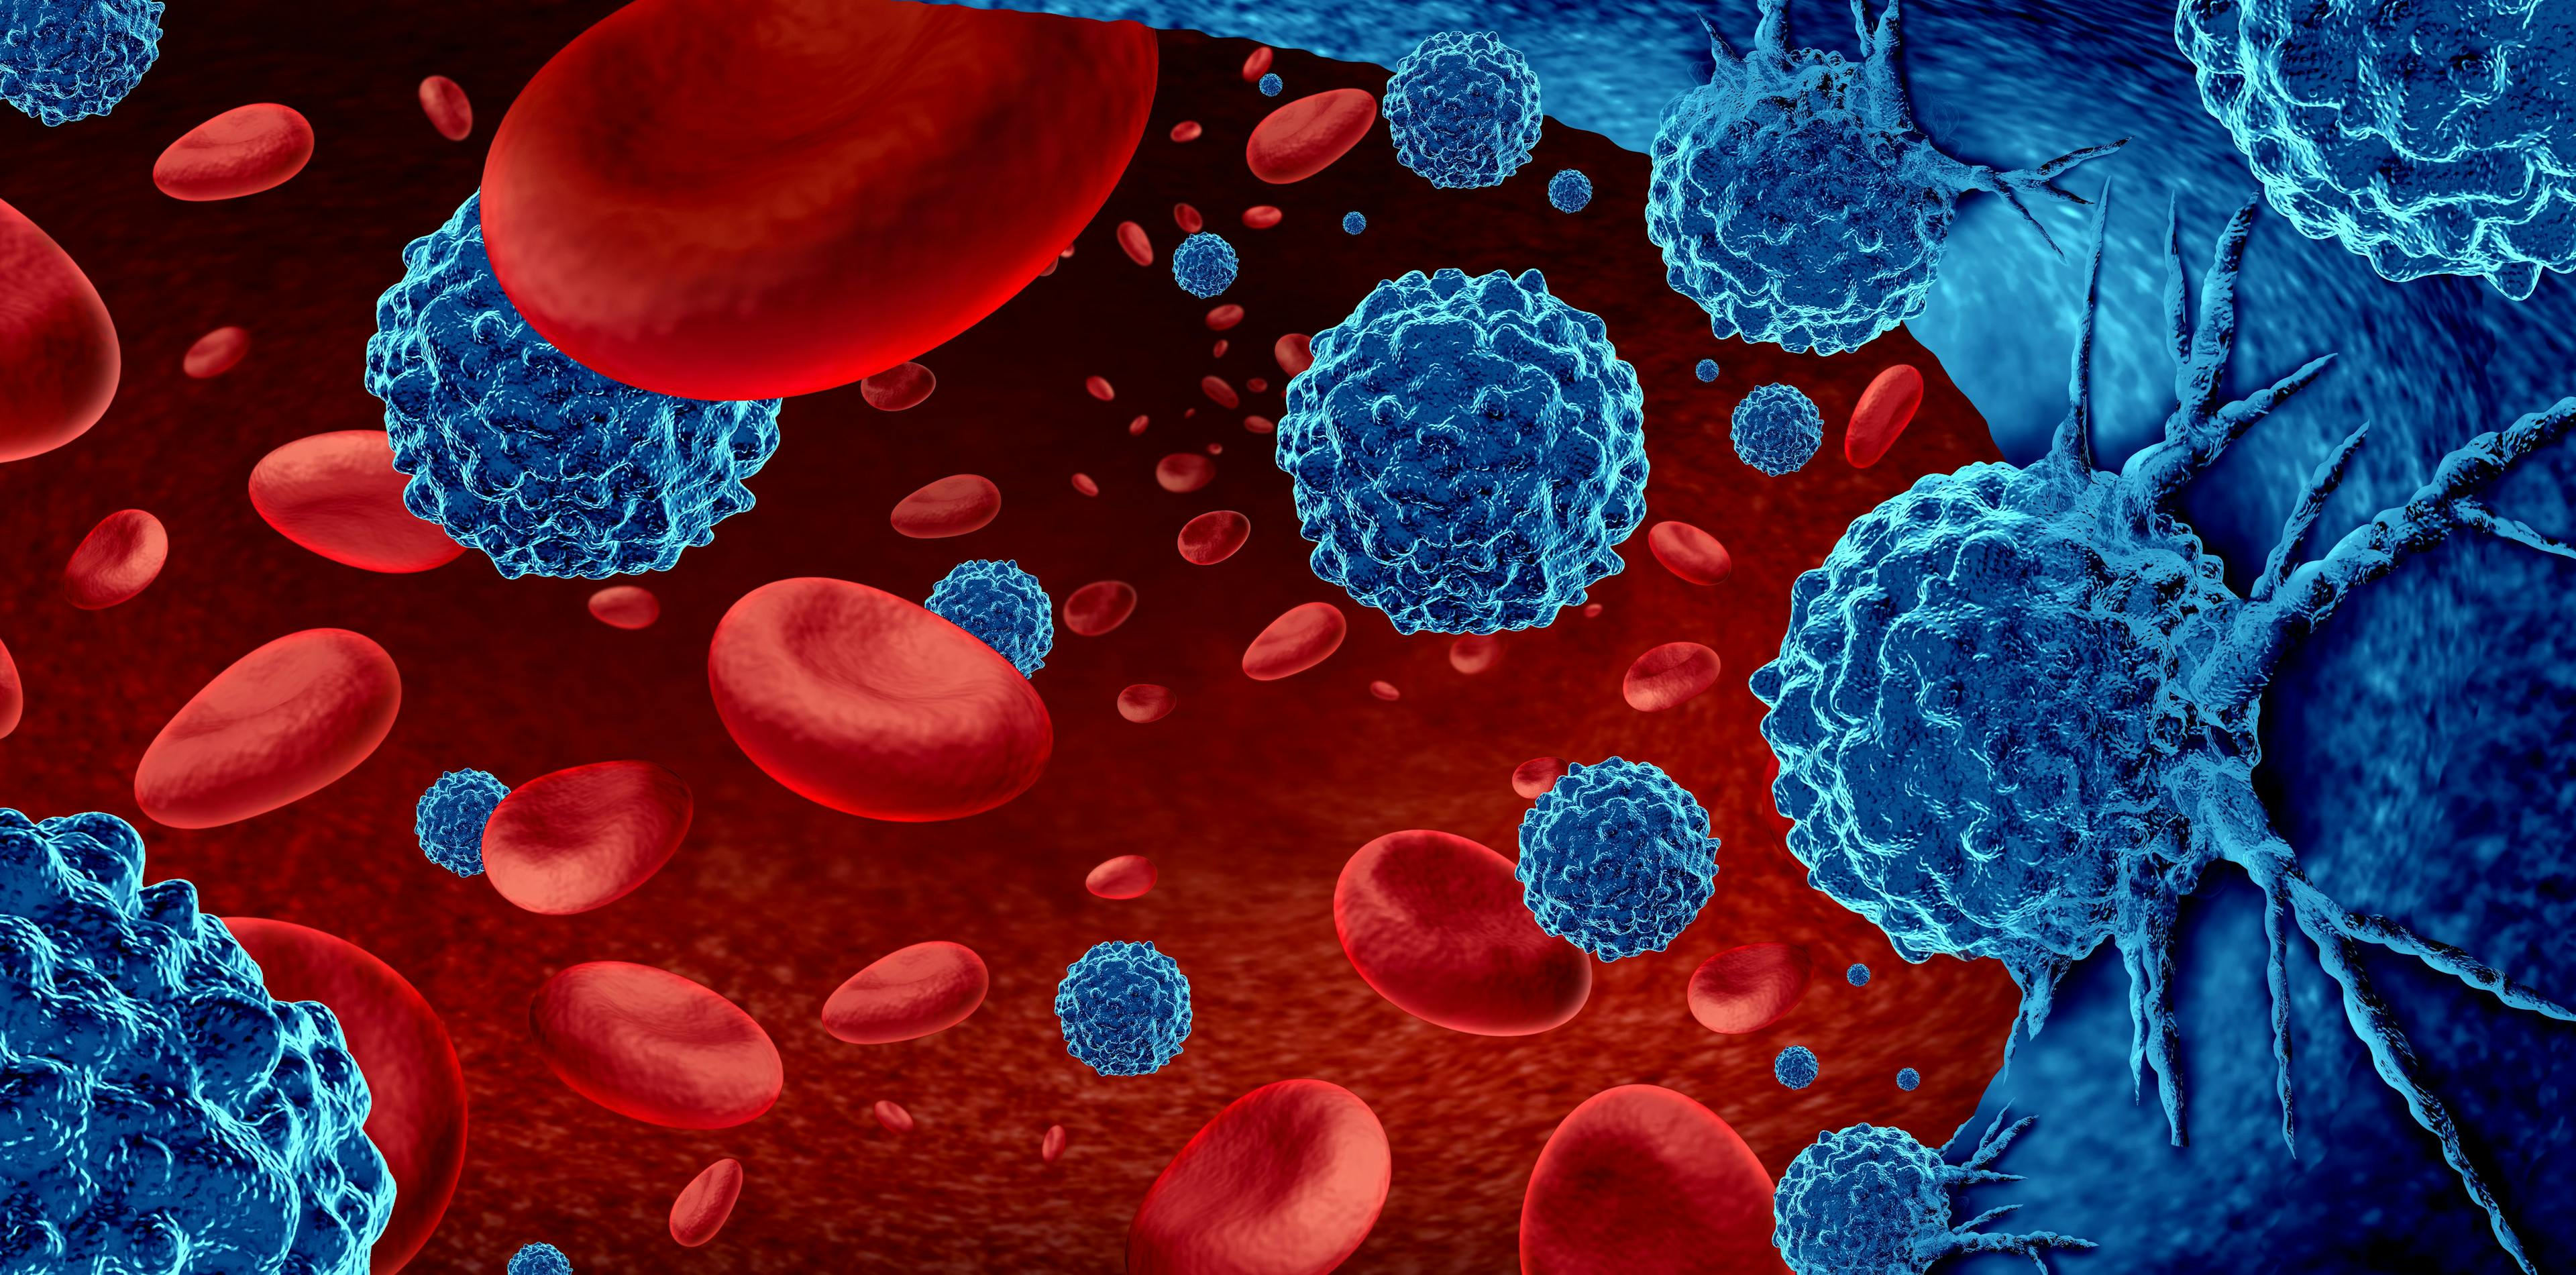 3D rendering of cancer in the blood: ©freshidea - stock.adobe.com